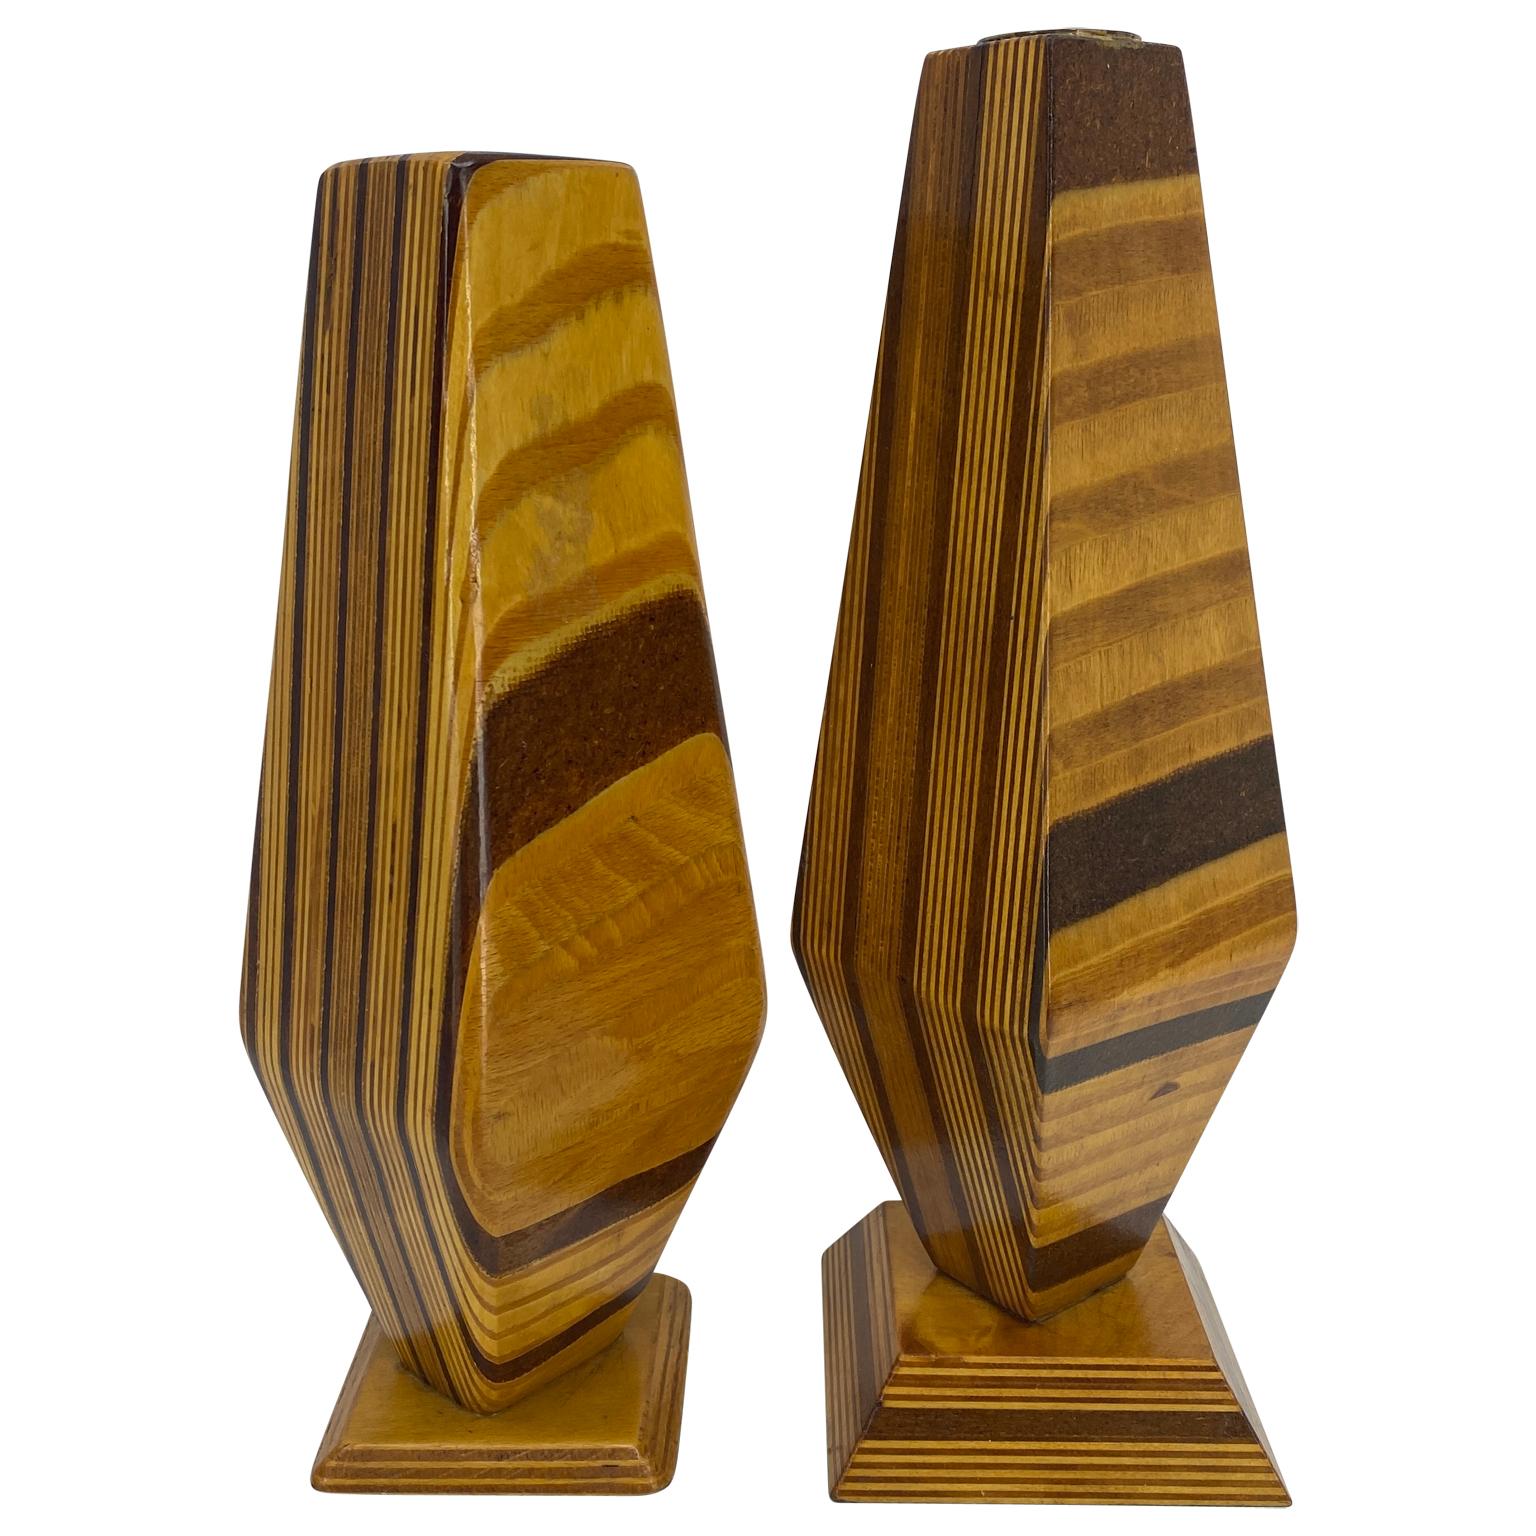 Mid-Century Modern tall and handsome wood inlay candleholders. This pair has one candleholder slightly taller than the other and both are striking with several wood inlays. Each candleholder has a felt bottom to protect surface and are striking in